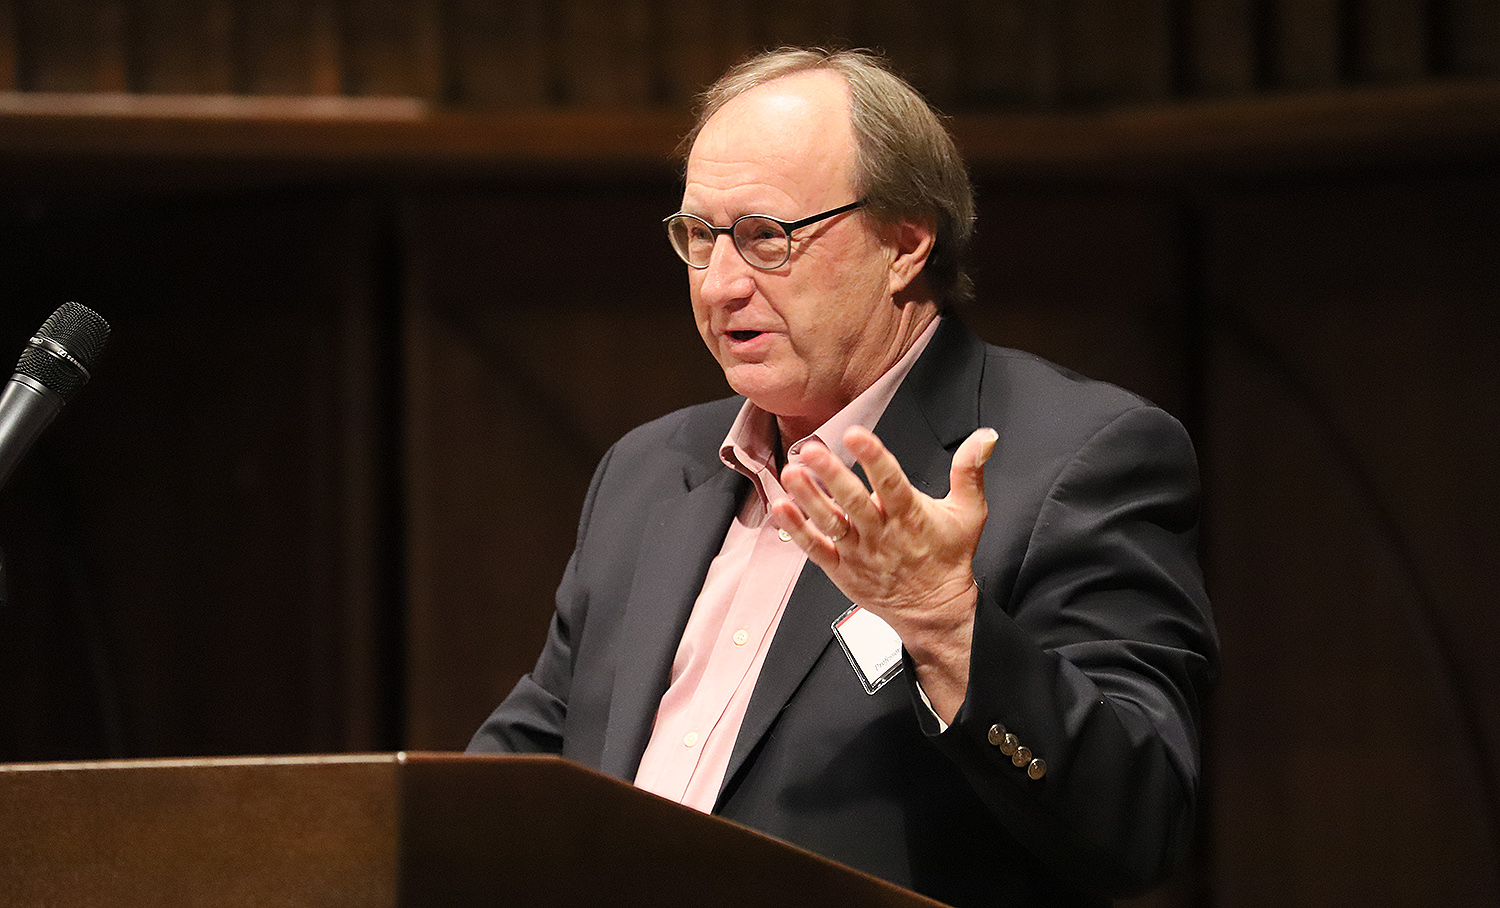 On April 5, John Finn, professor of government emeritus, delivered the 27th annual Hugo L. Black Lecture on Freedom of Expression in Memorial Chapel. His talk was titled "Gun Nuts and Speech Freaks: A Guide to the Alt-Constitution."